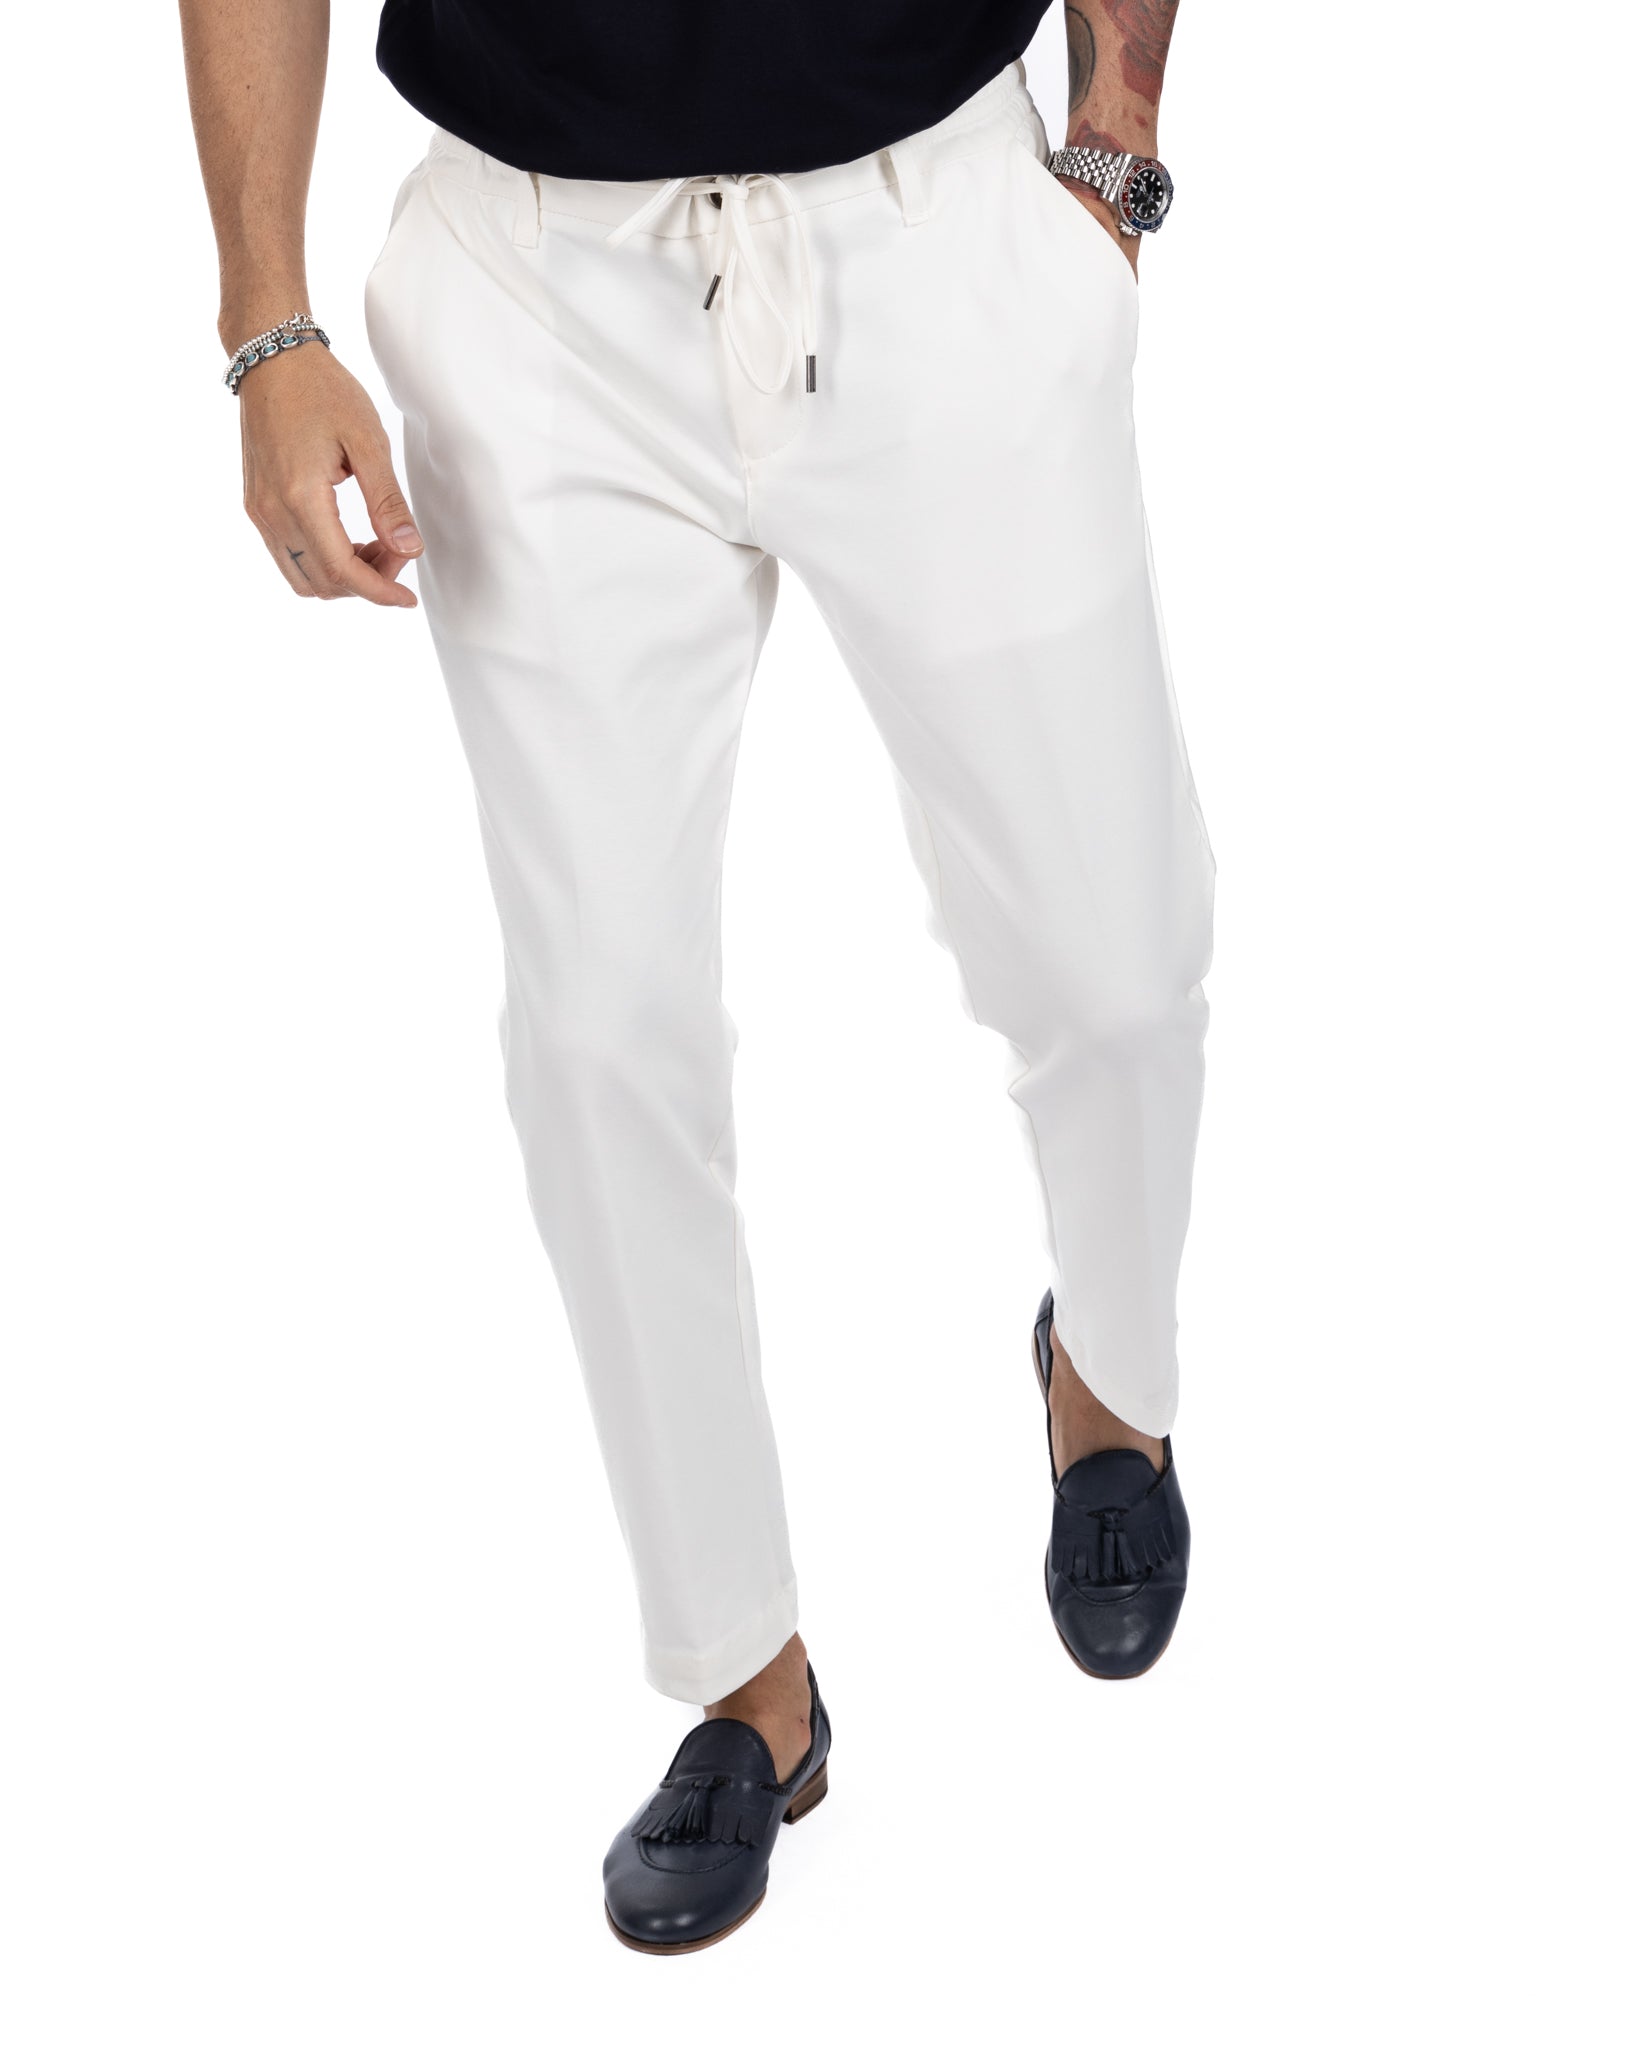 Shelby - cream cotton trousers